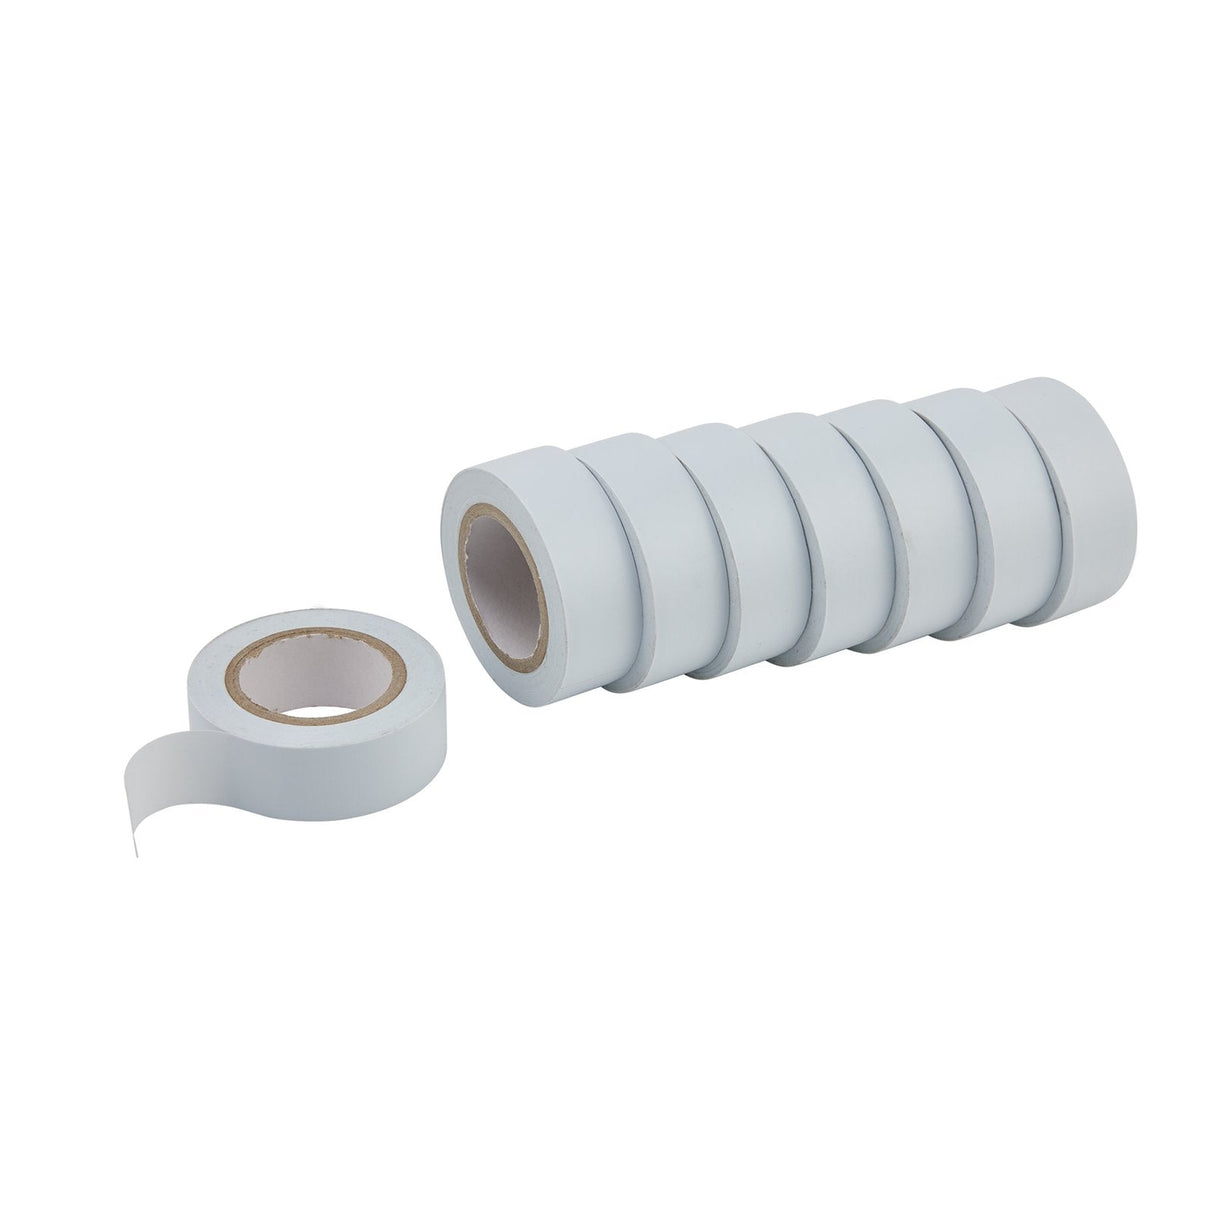 Draper Insulation Tape To Bsen60454/Type2, 10M X 19mm, White (Pack Of 8) - 619 - Farming Parts